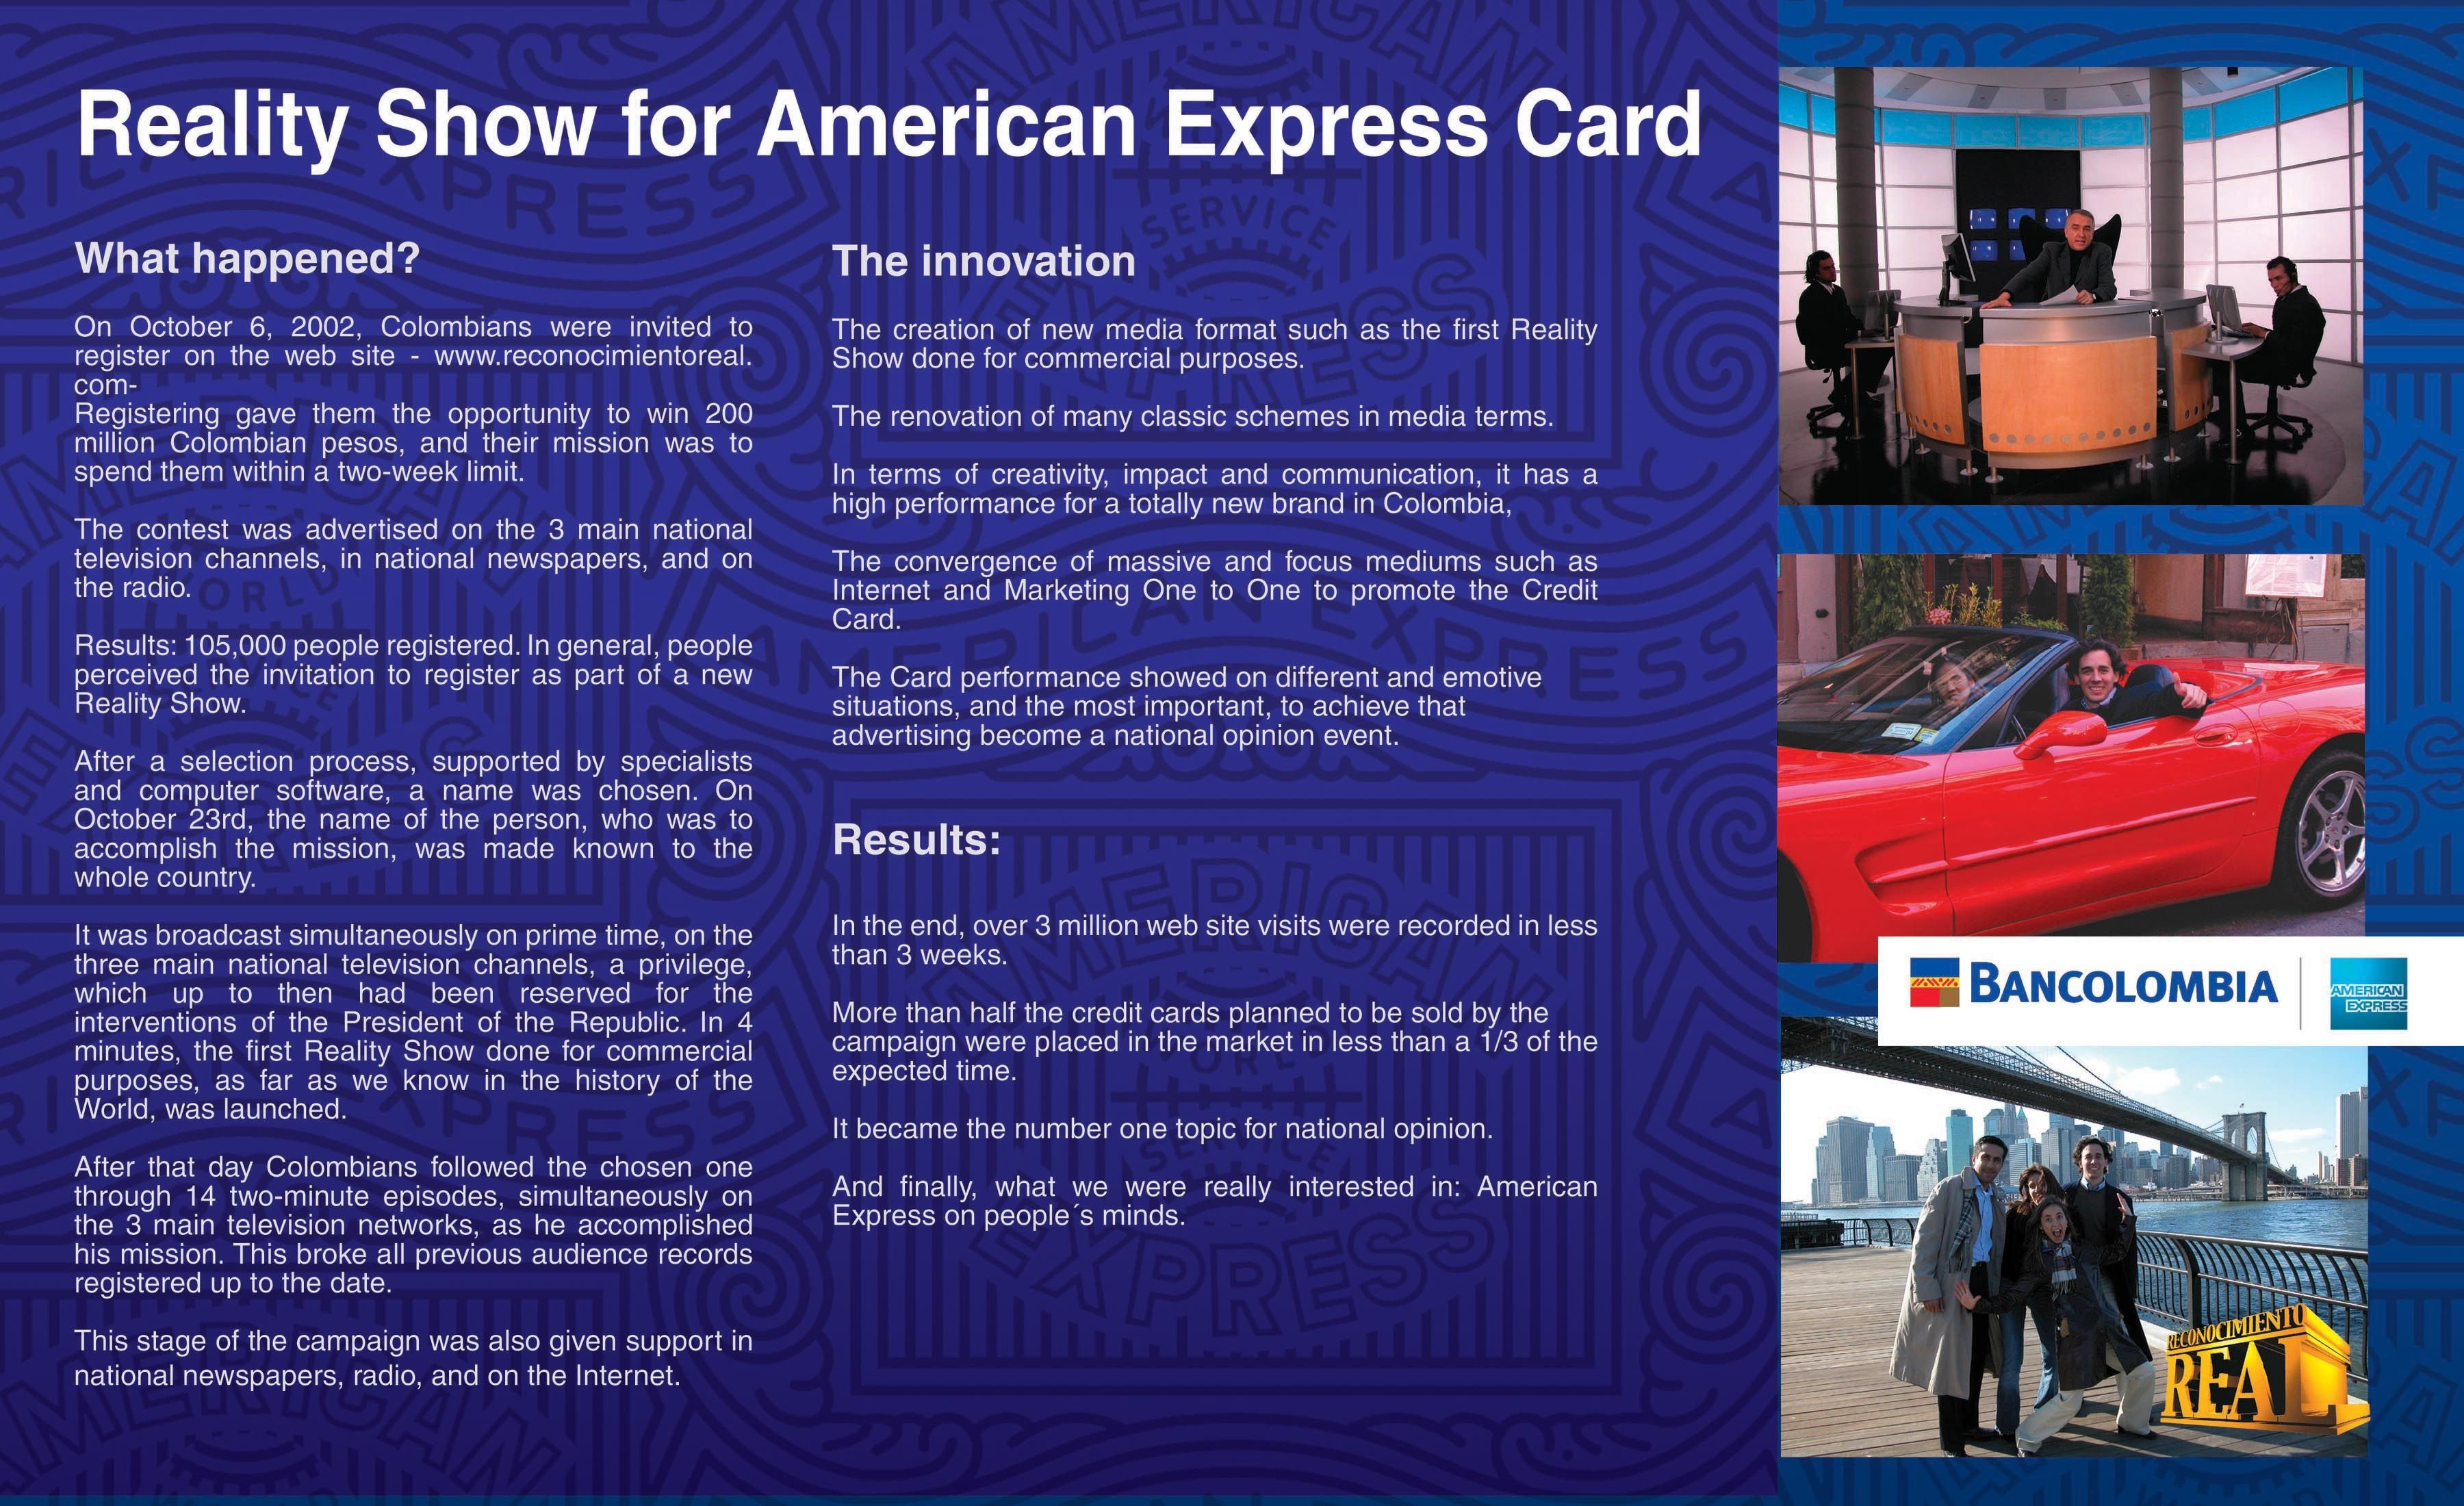 AMERICAN EXPRESS CARD FROM BANCOLOMBIA